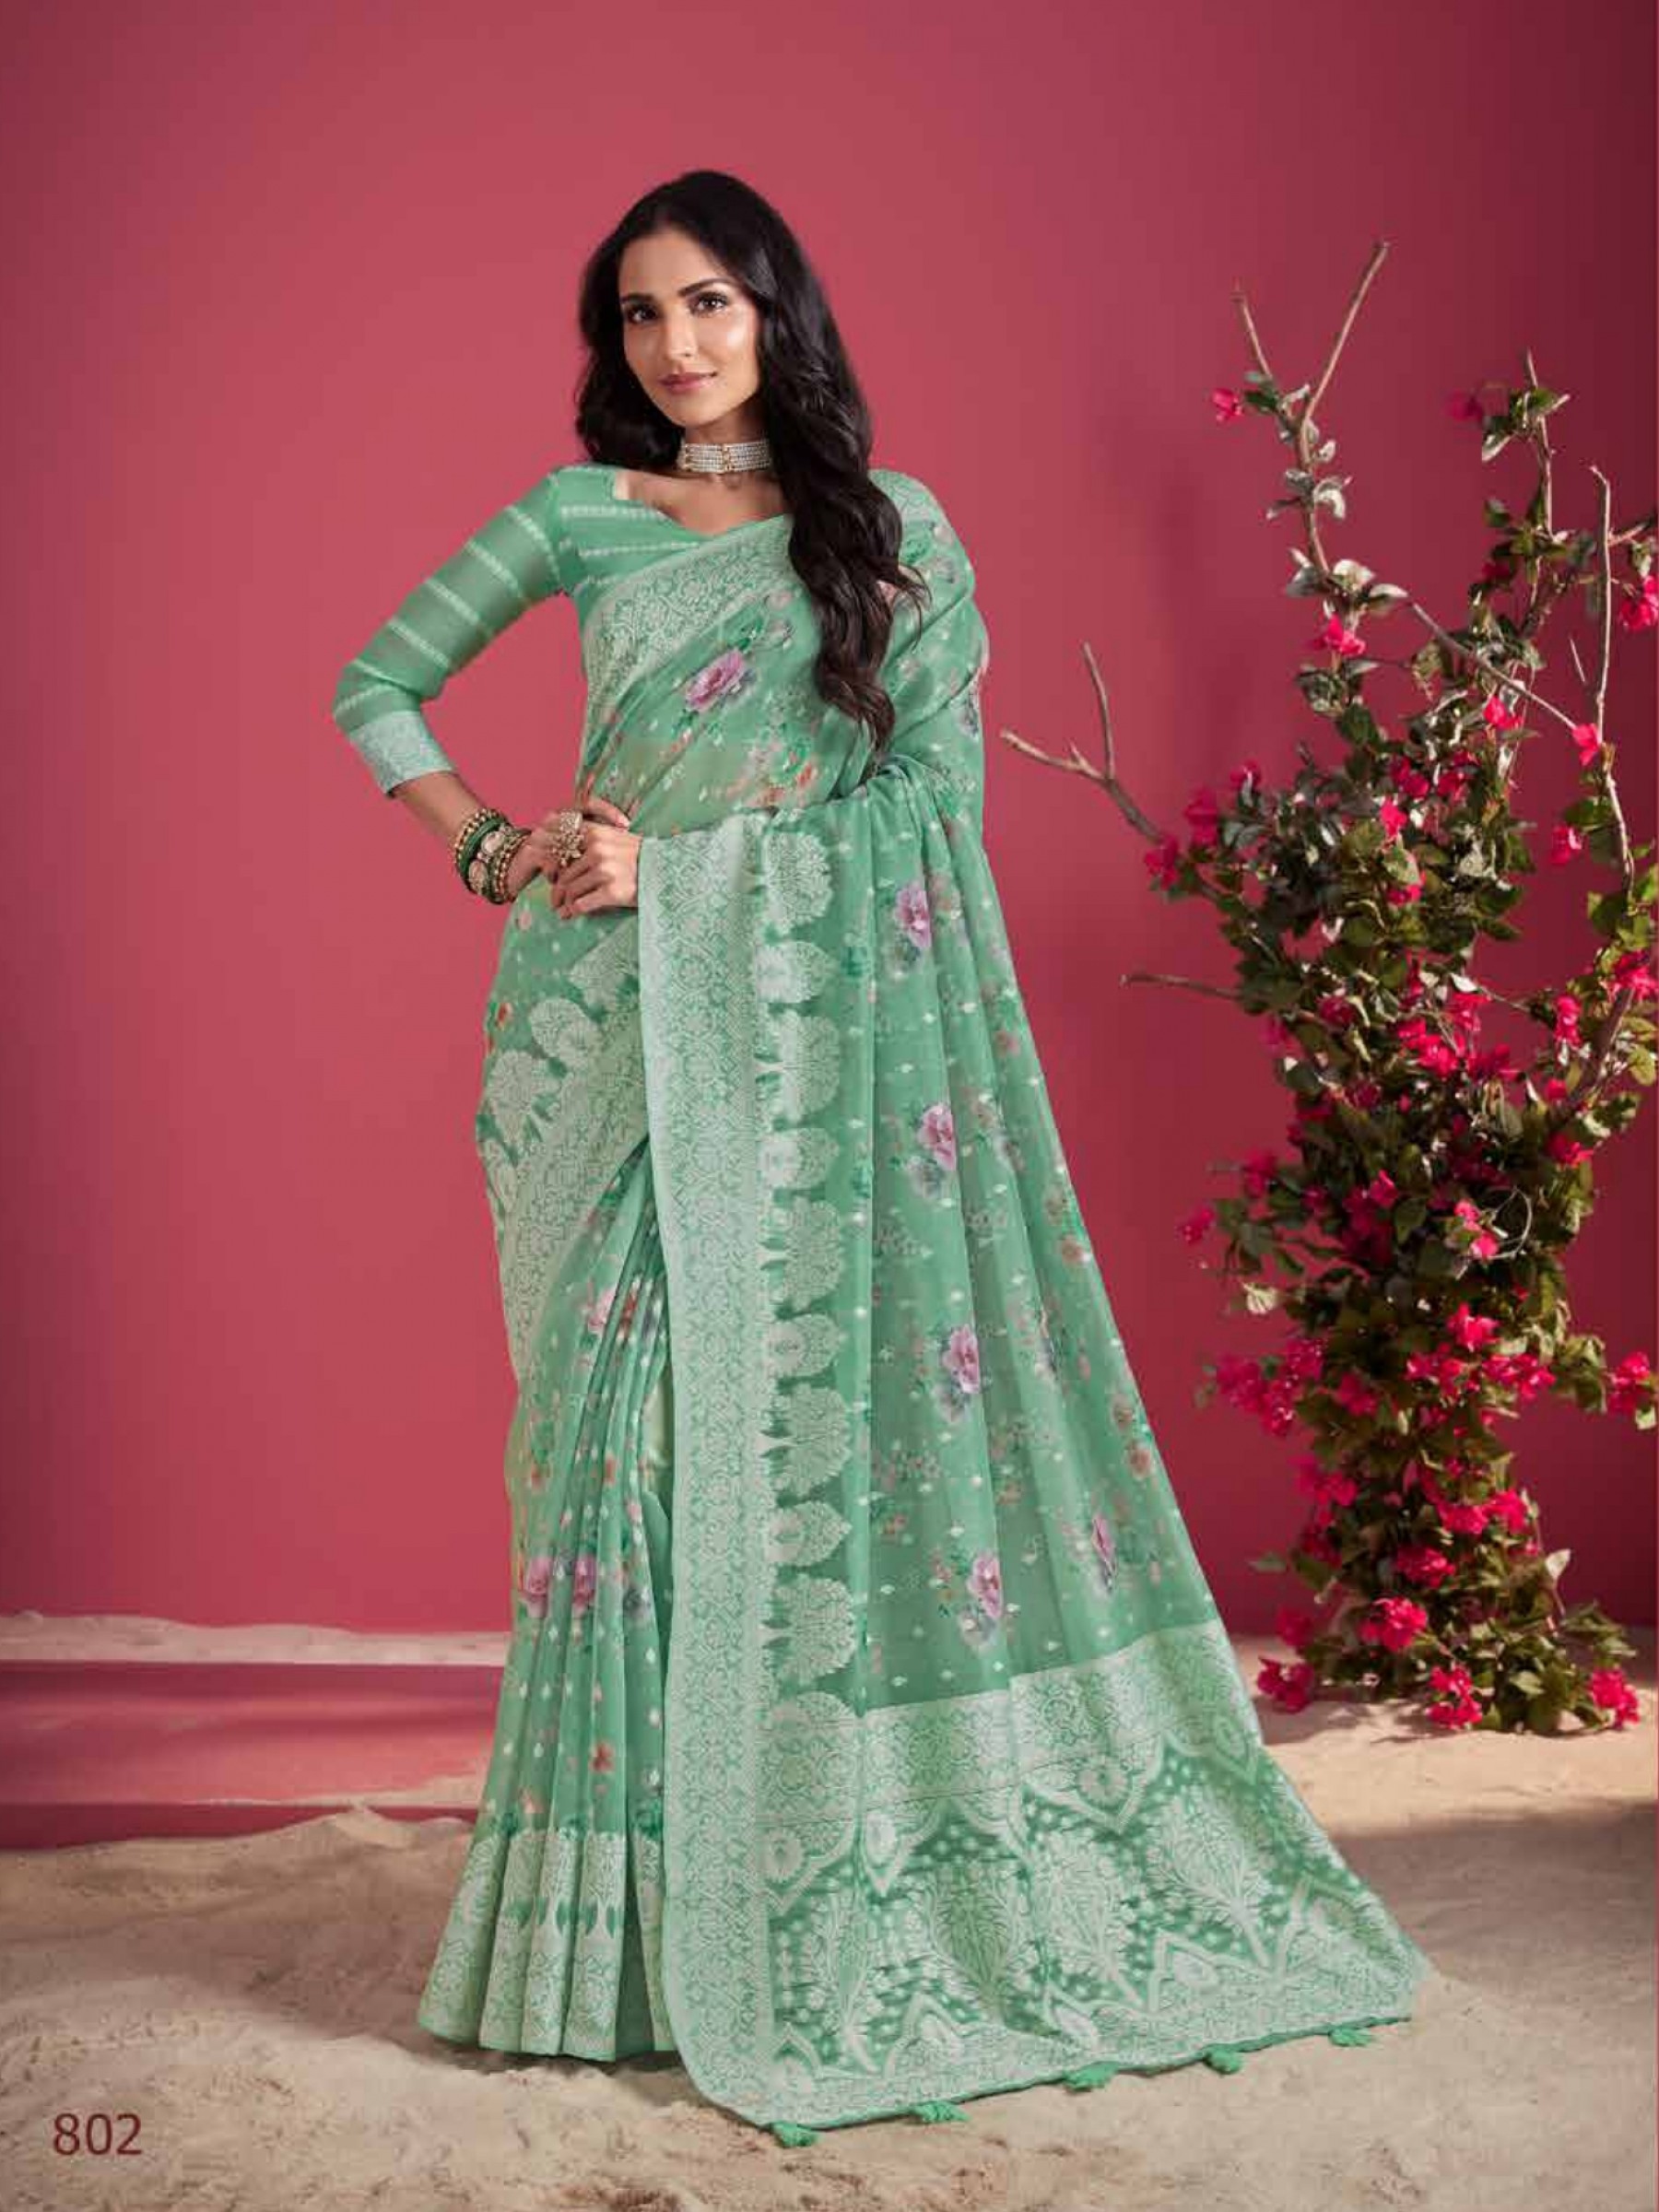  Silk Saree In Green Color With Digital Print Work